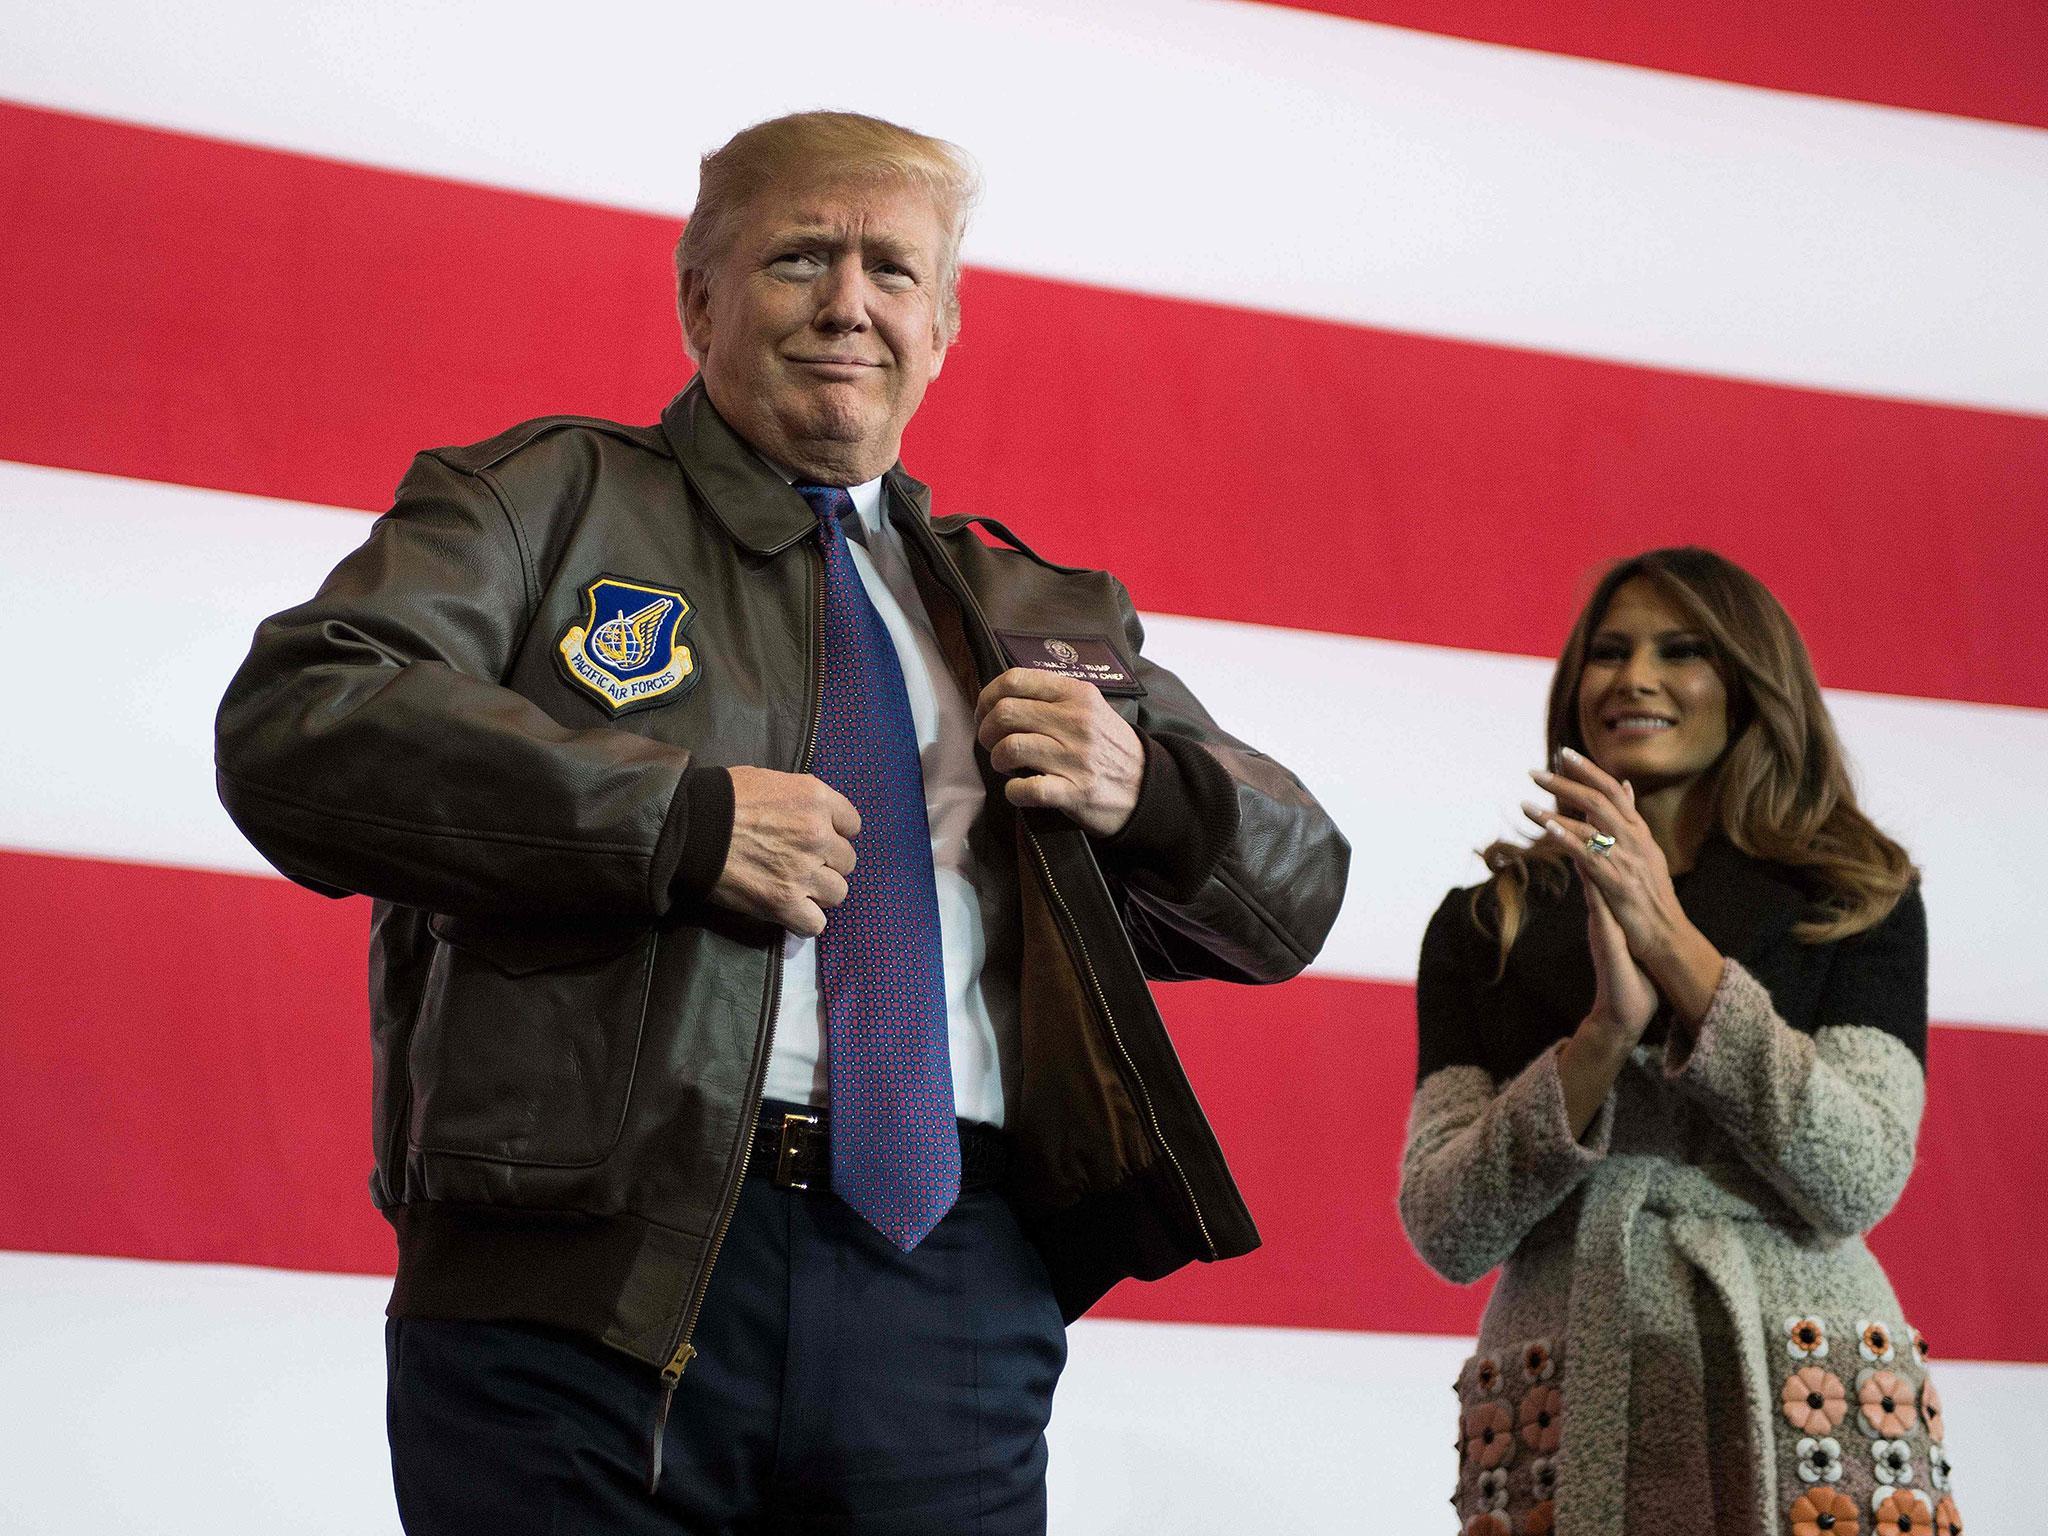 Donald Trump (R) prepares to address US soldiers as his wife Melania looks on upon arriving at US Yokota Air Base in Tokyo